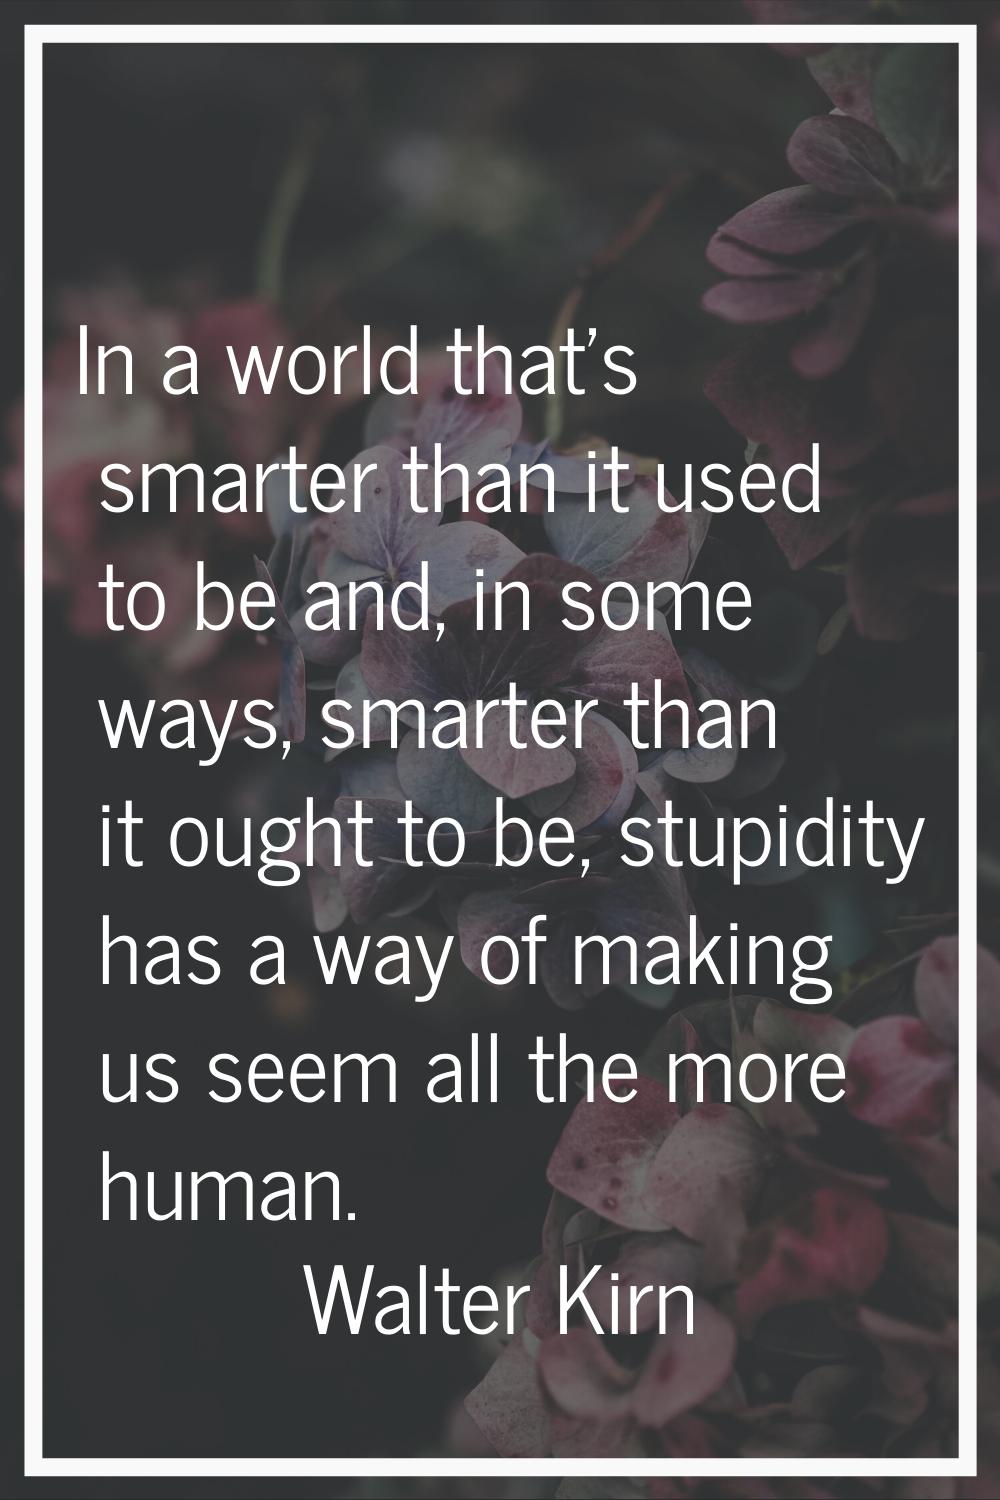 In a world that's smarter than it used to be and, in some ways, smarter than it ought to be, stupid